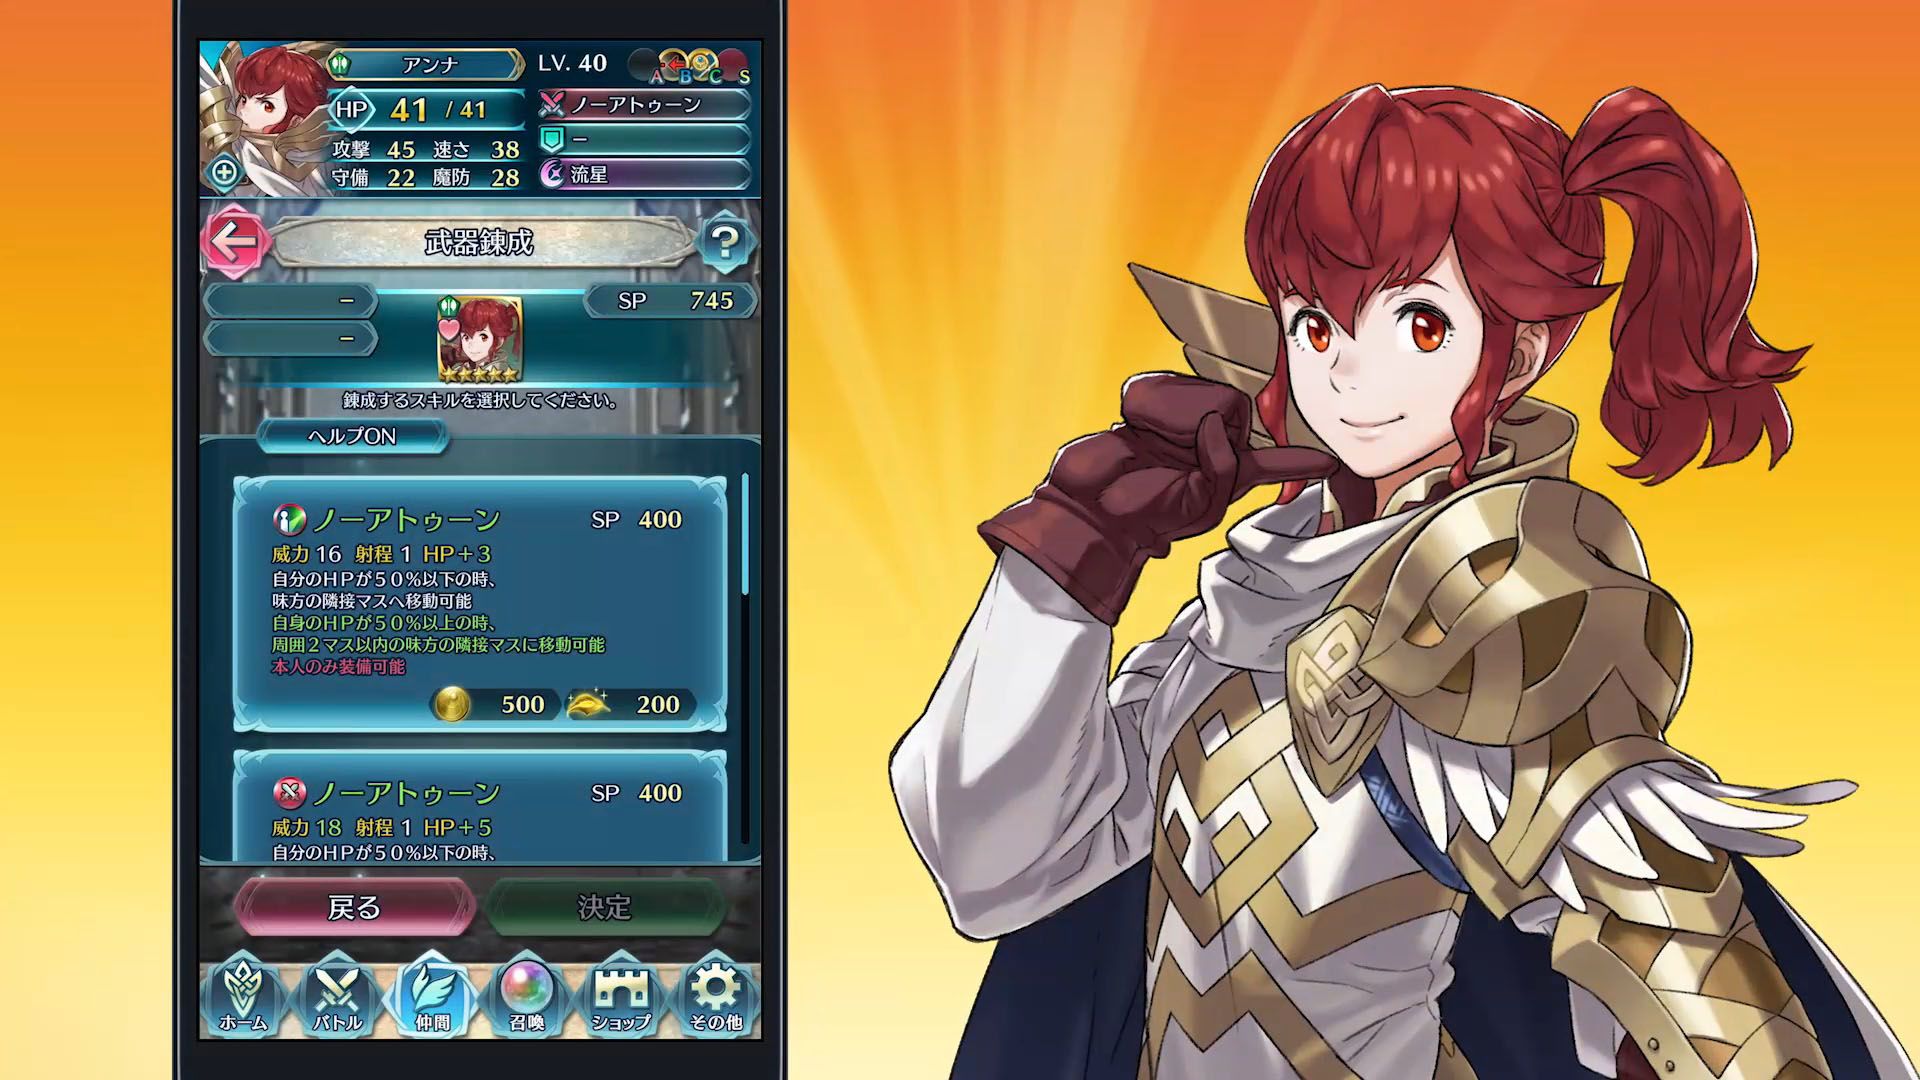 Fire Emblem Heroes All The Details From The 7th Feh Channel Presentation Ver 2 8 0 Forging Bonds Event More Perfectly Nintendo